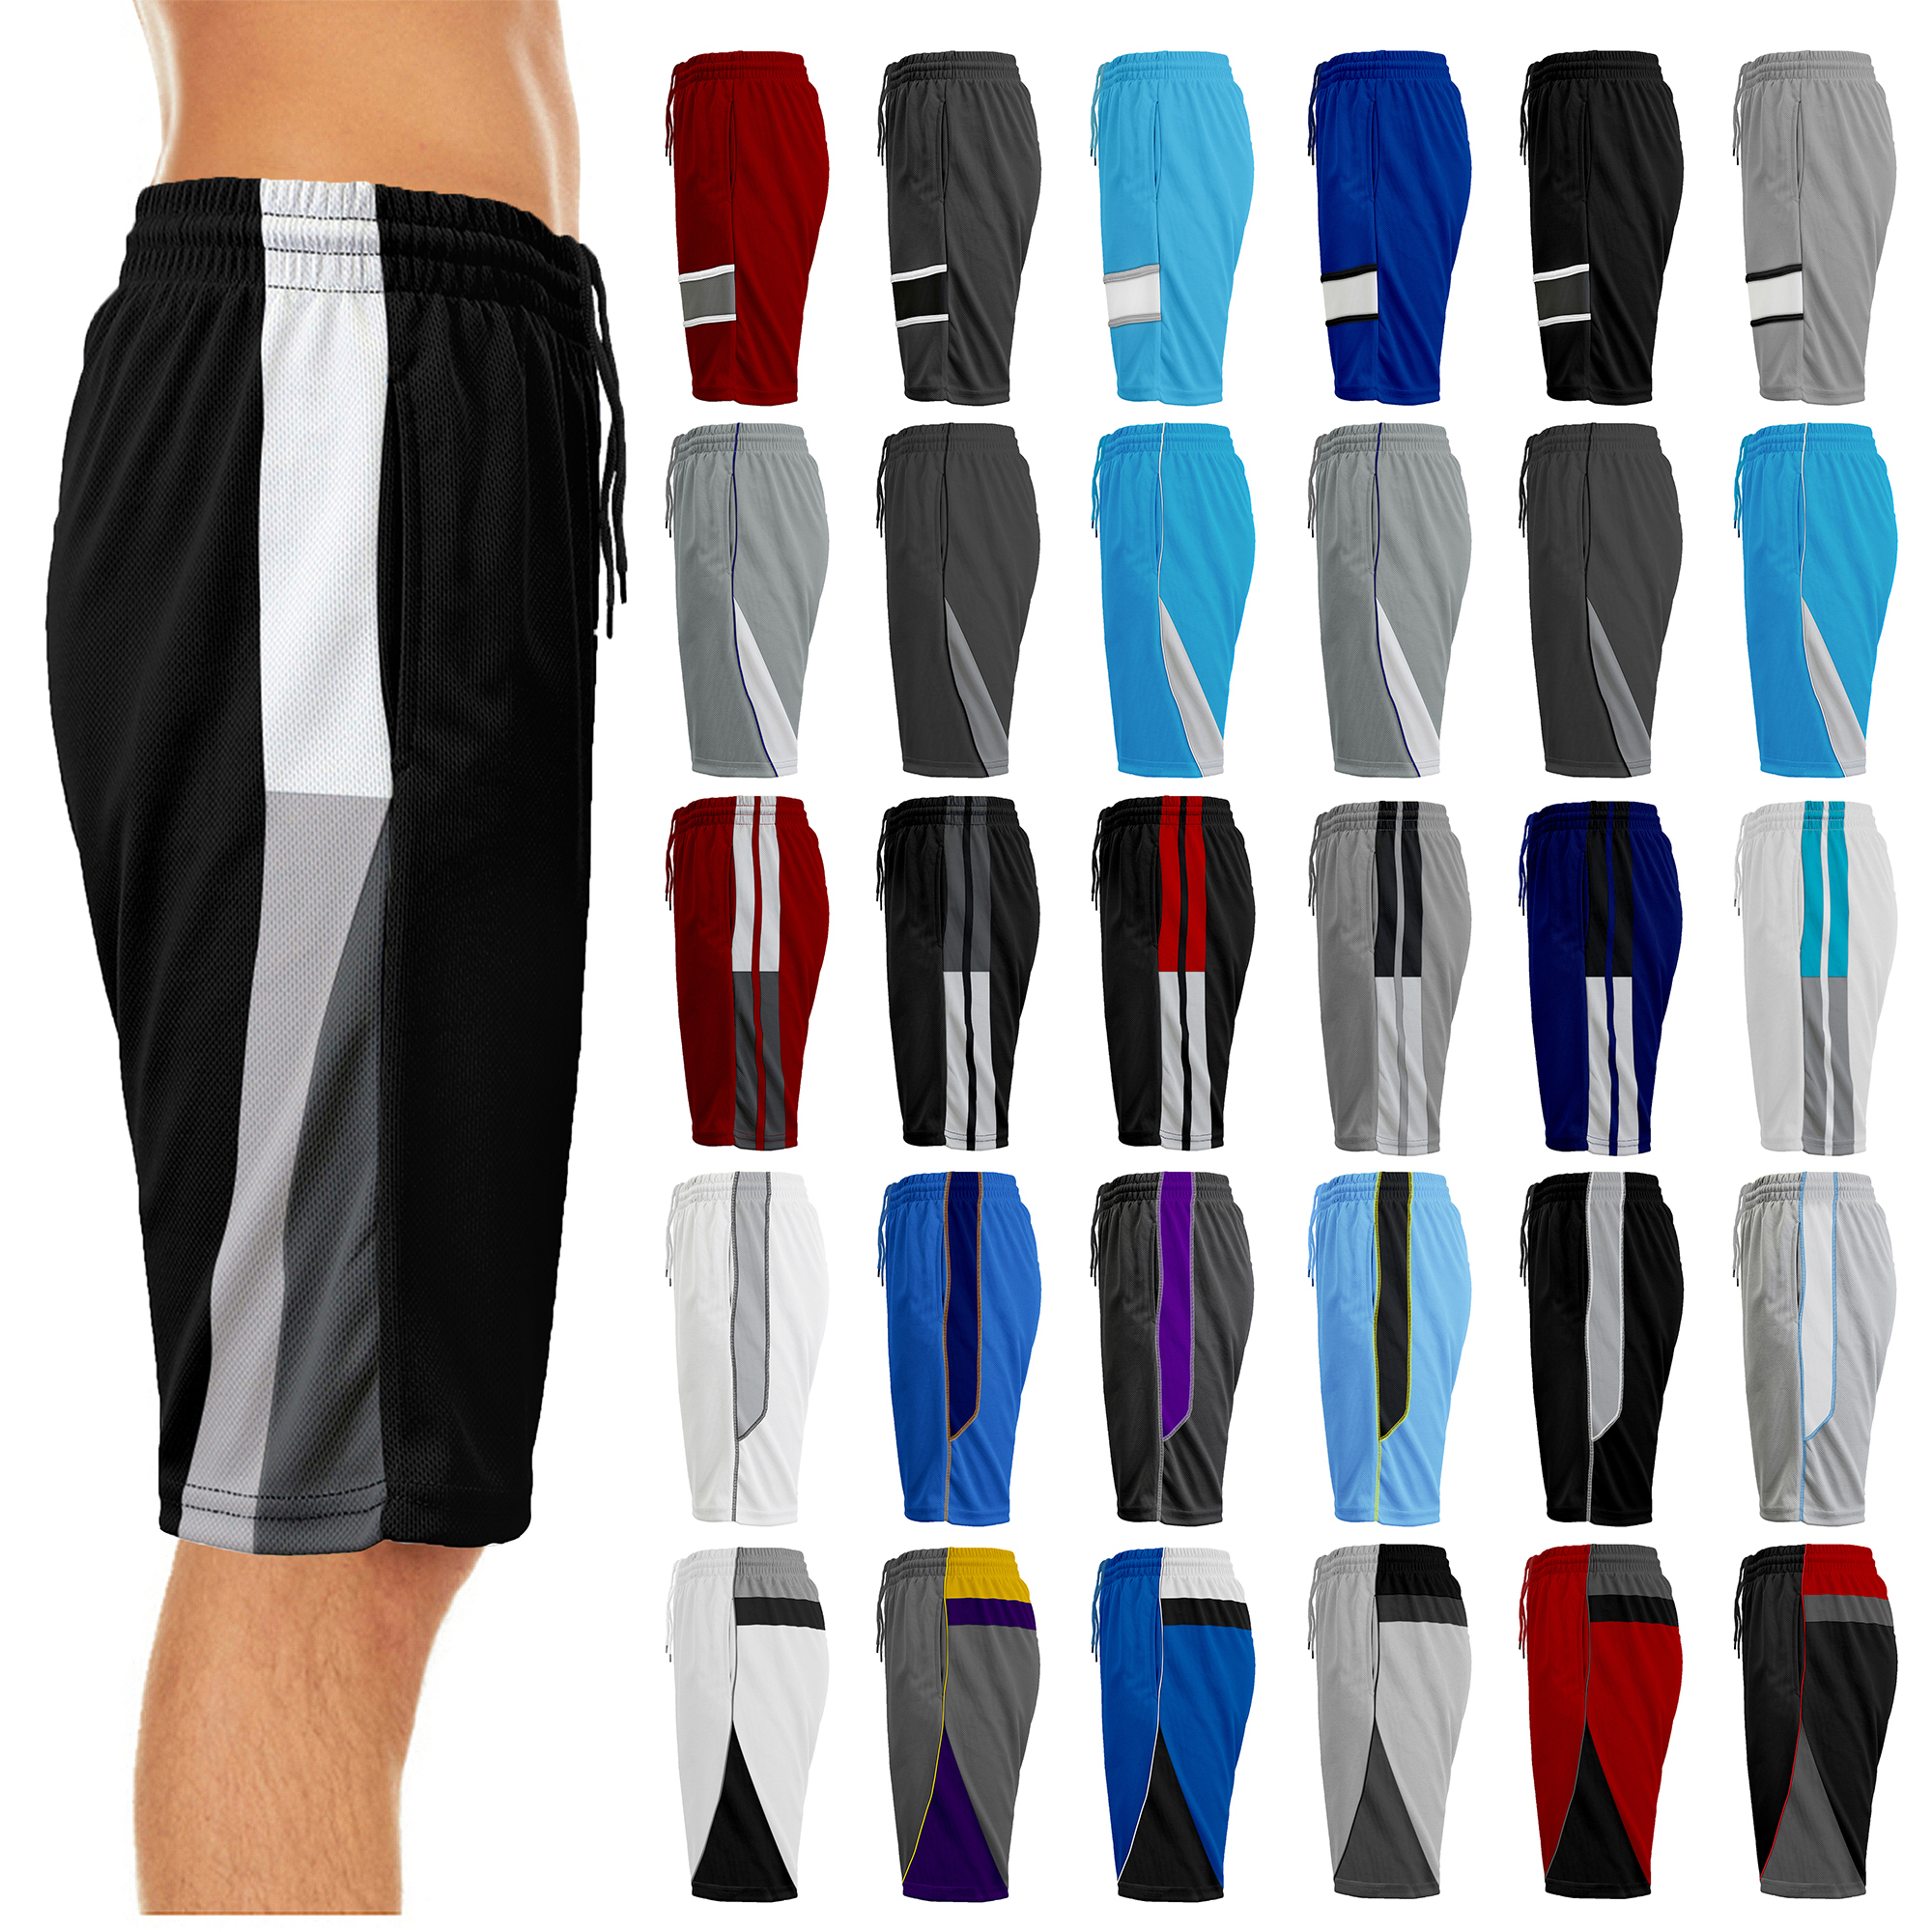 5-Pack: Men's Active Summer Athletic Mesh Moisture-Wicking Performance Shorts - X-Large